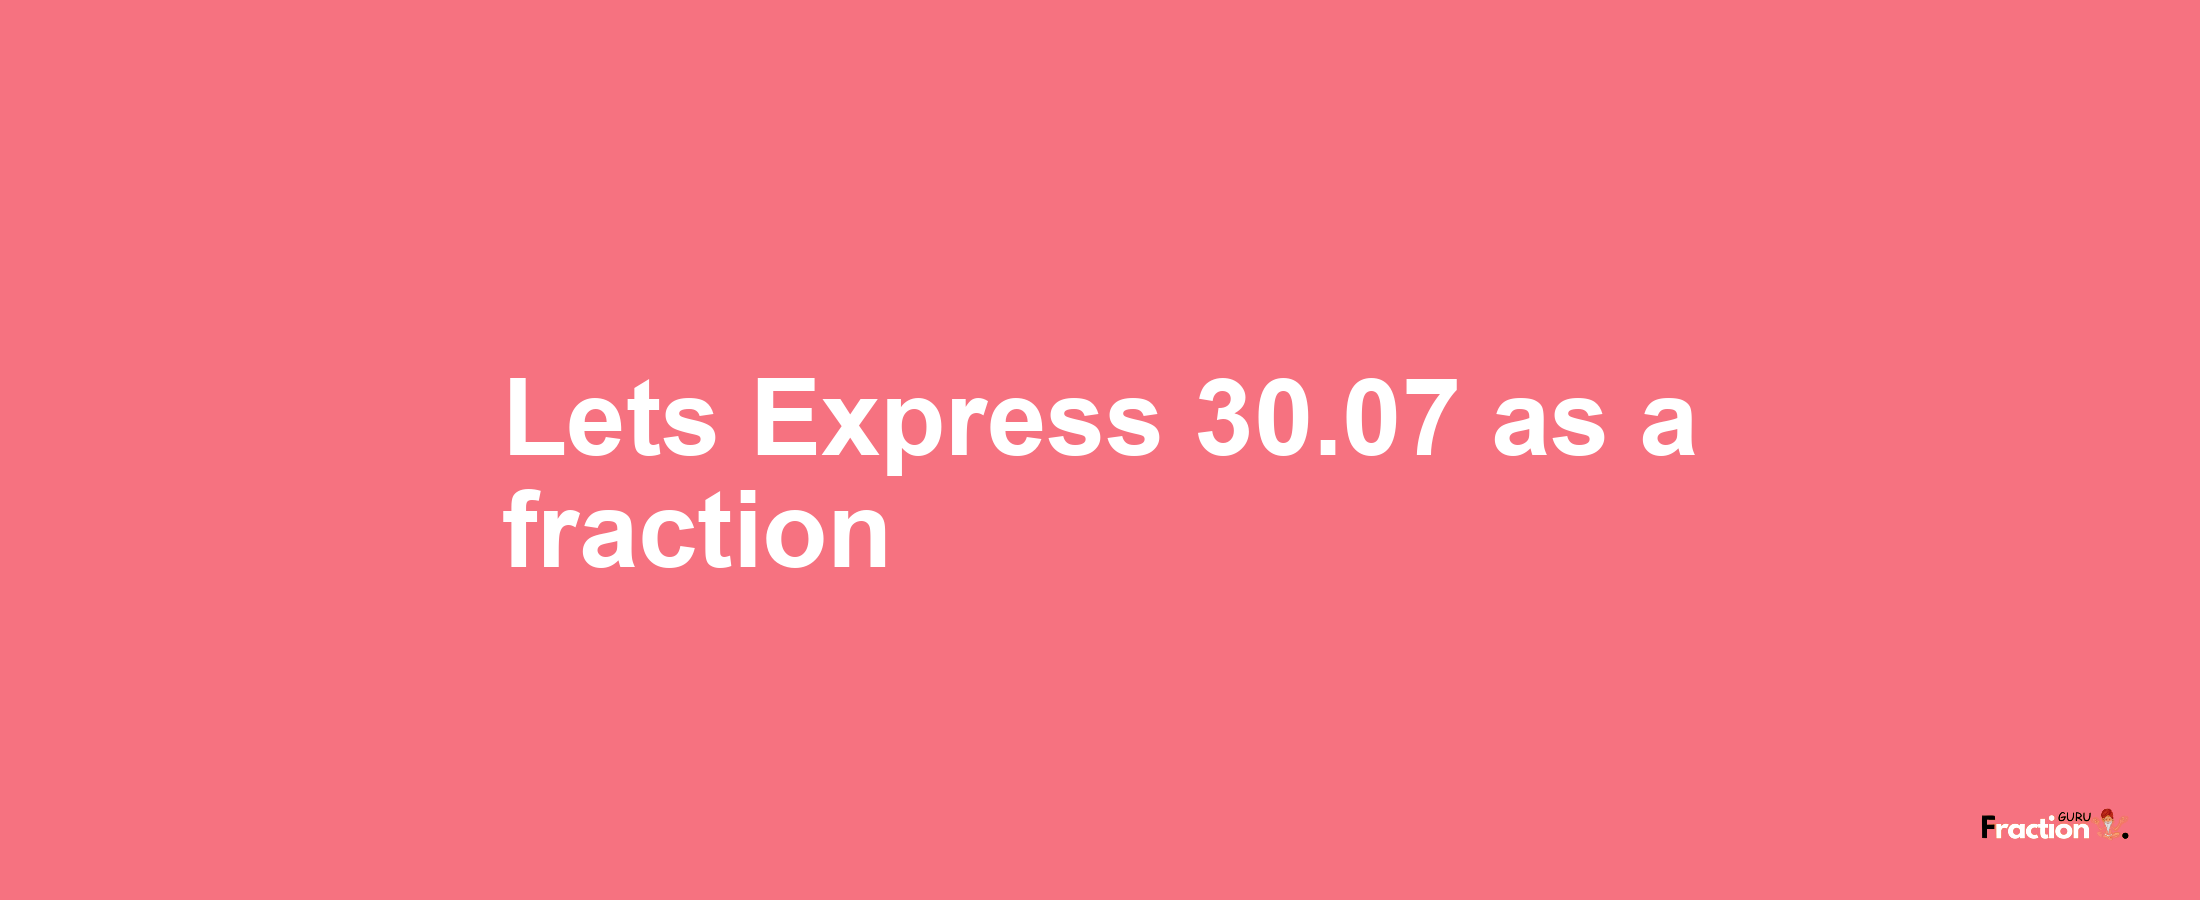 Lets Express 30.07 as afraction